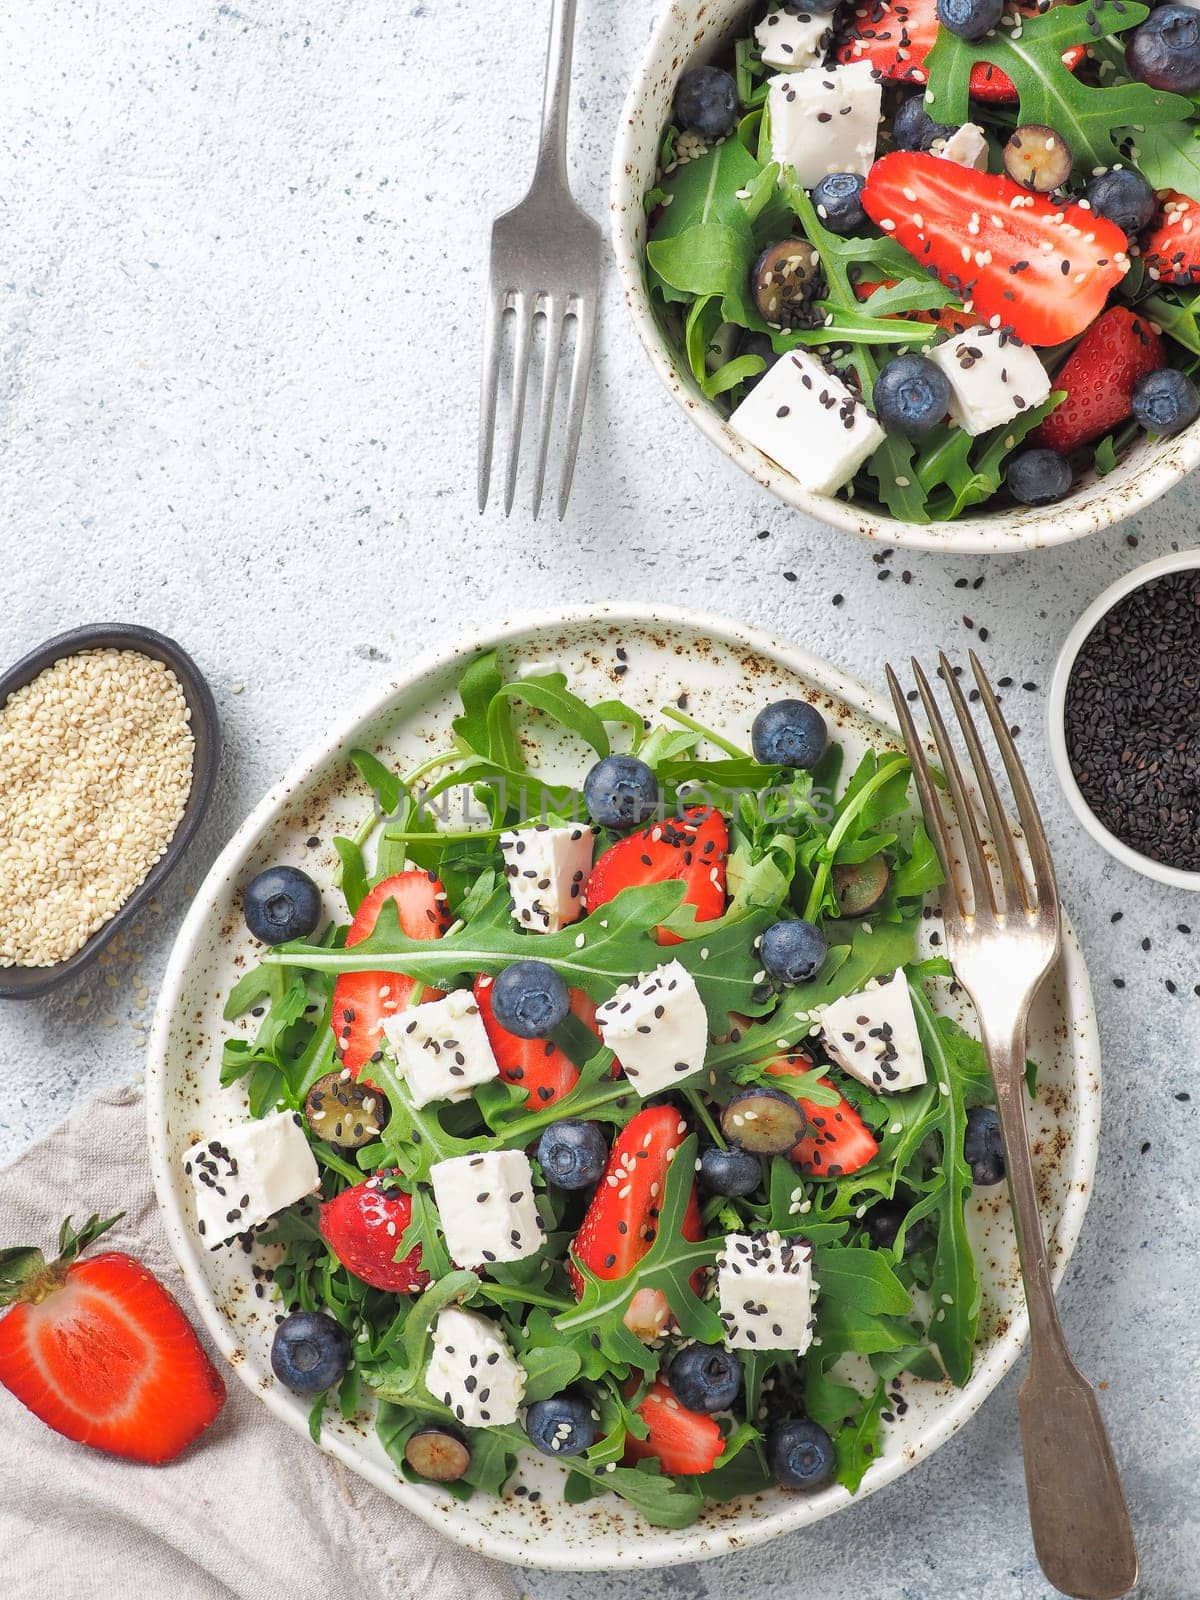 Salad with arugula,feta cheese and berries-strawberry,blueberry,in craft plate on gray cement background.Summer salad idea and recipe for healthy vegetarian lunch,dinner.Top view.Copy space. Vertical